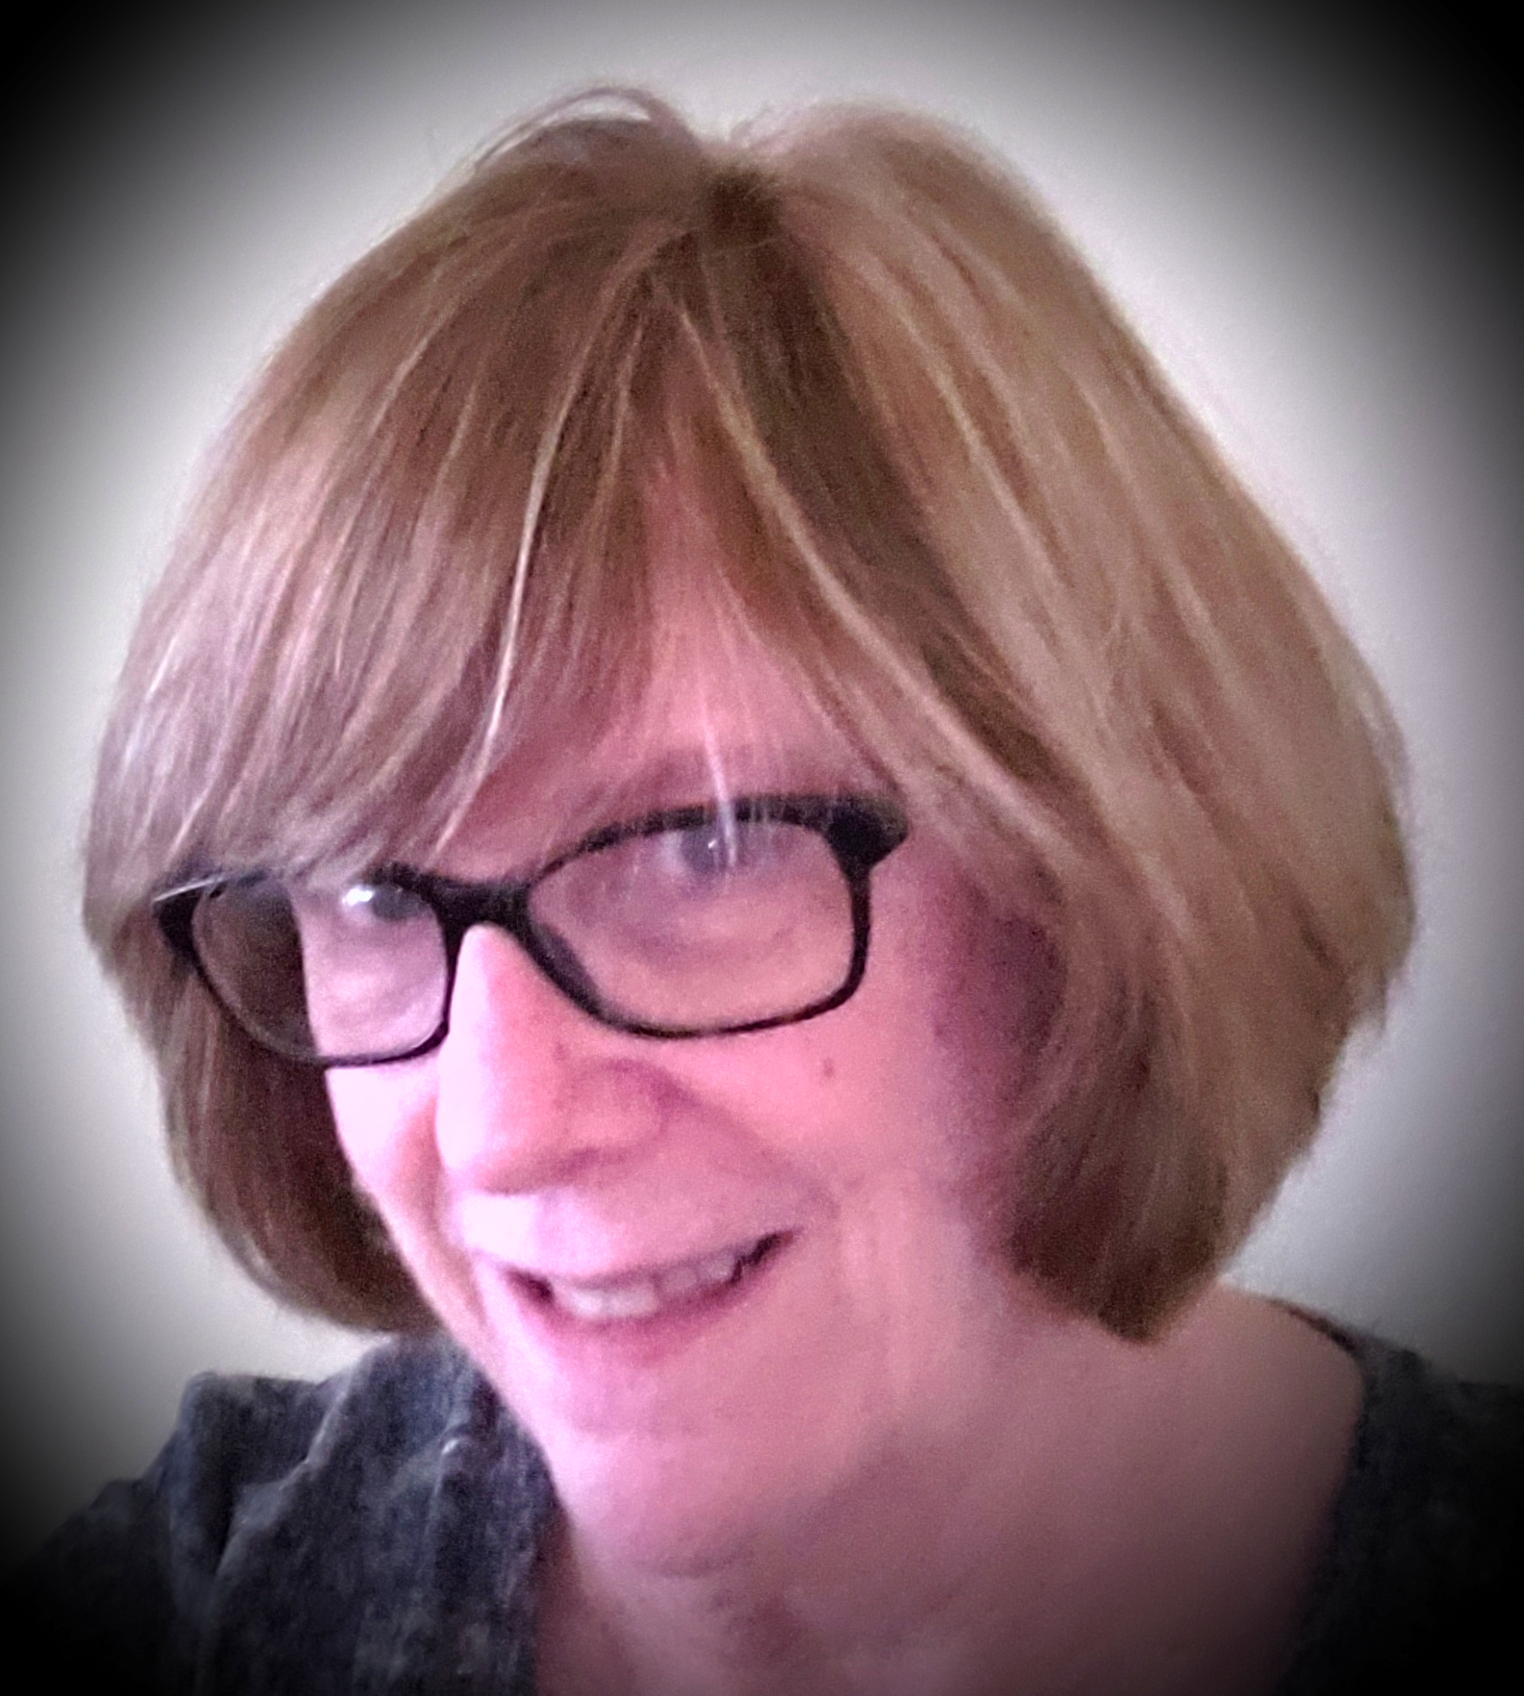 Long time educator Susan Brooks-Young works with educators internationally, focusing on the effective implementation of technology in schools and on well-being for educators. She will be a featured speaker at FETC.